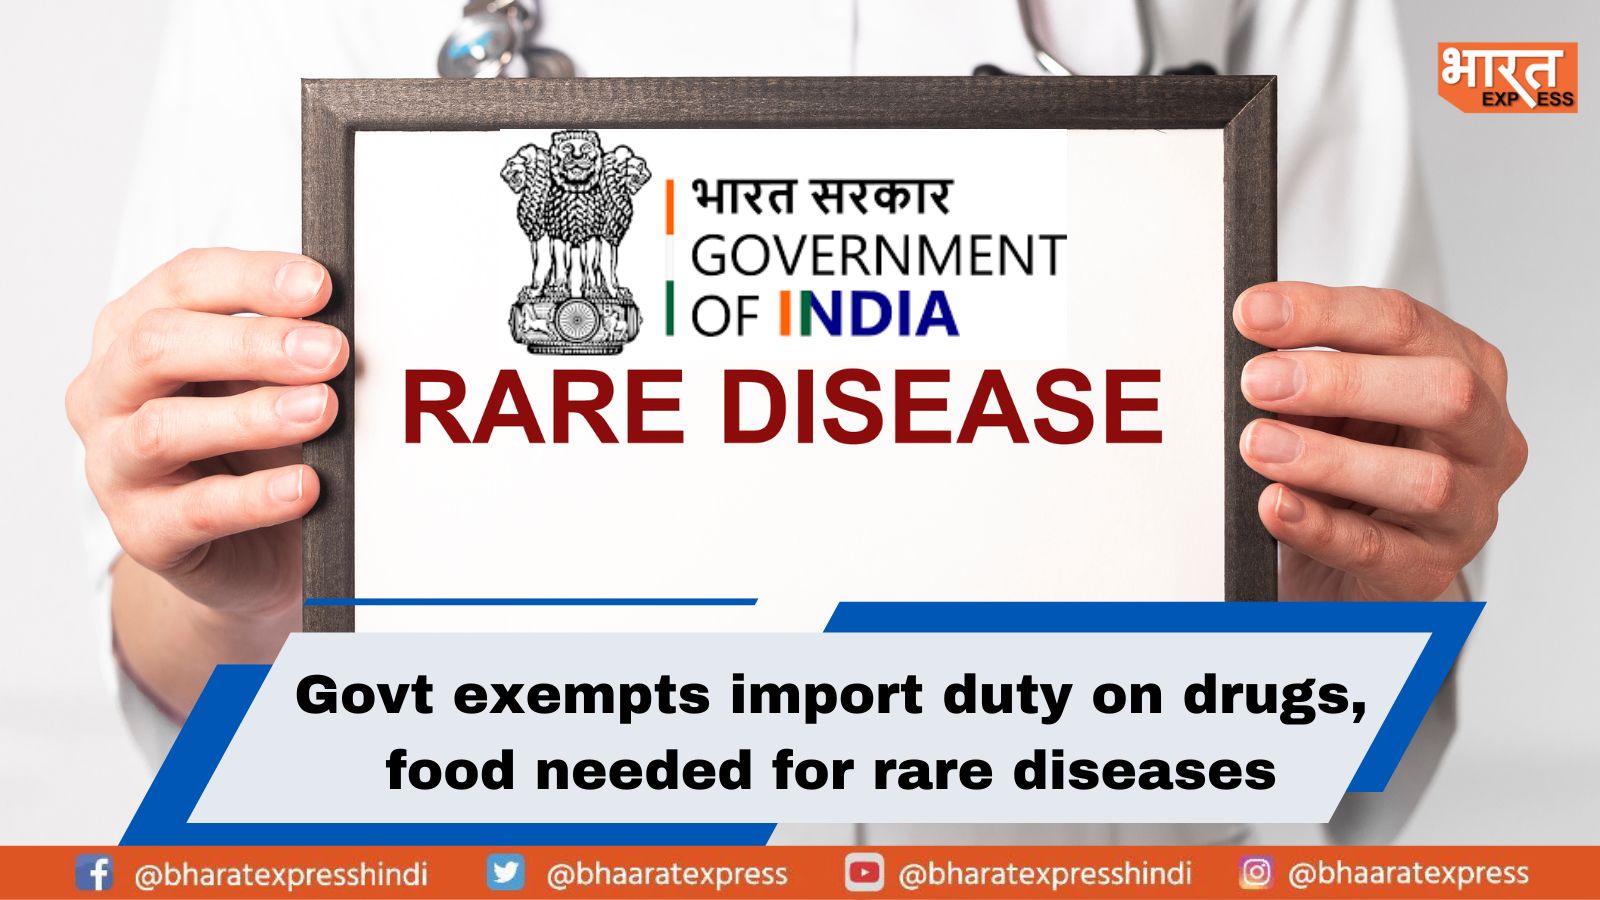 Now fighting rare diseases will be economical